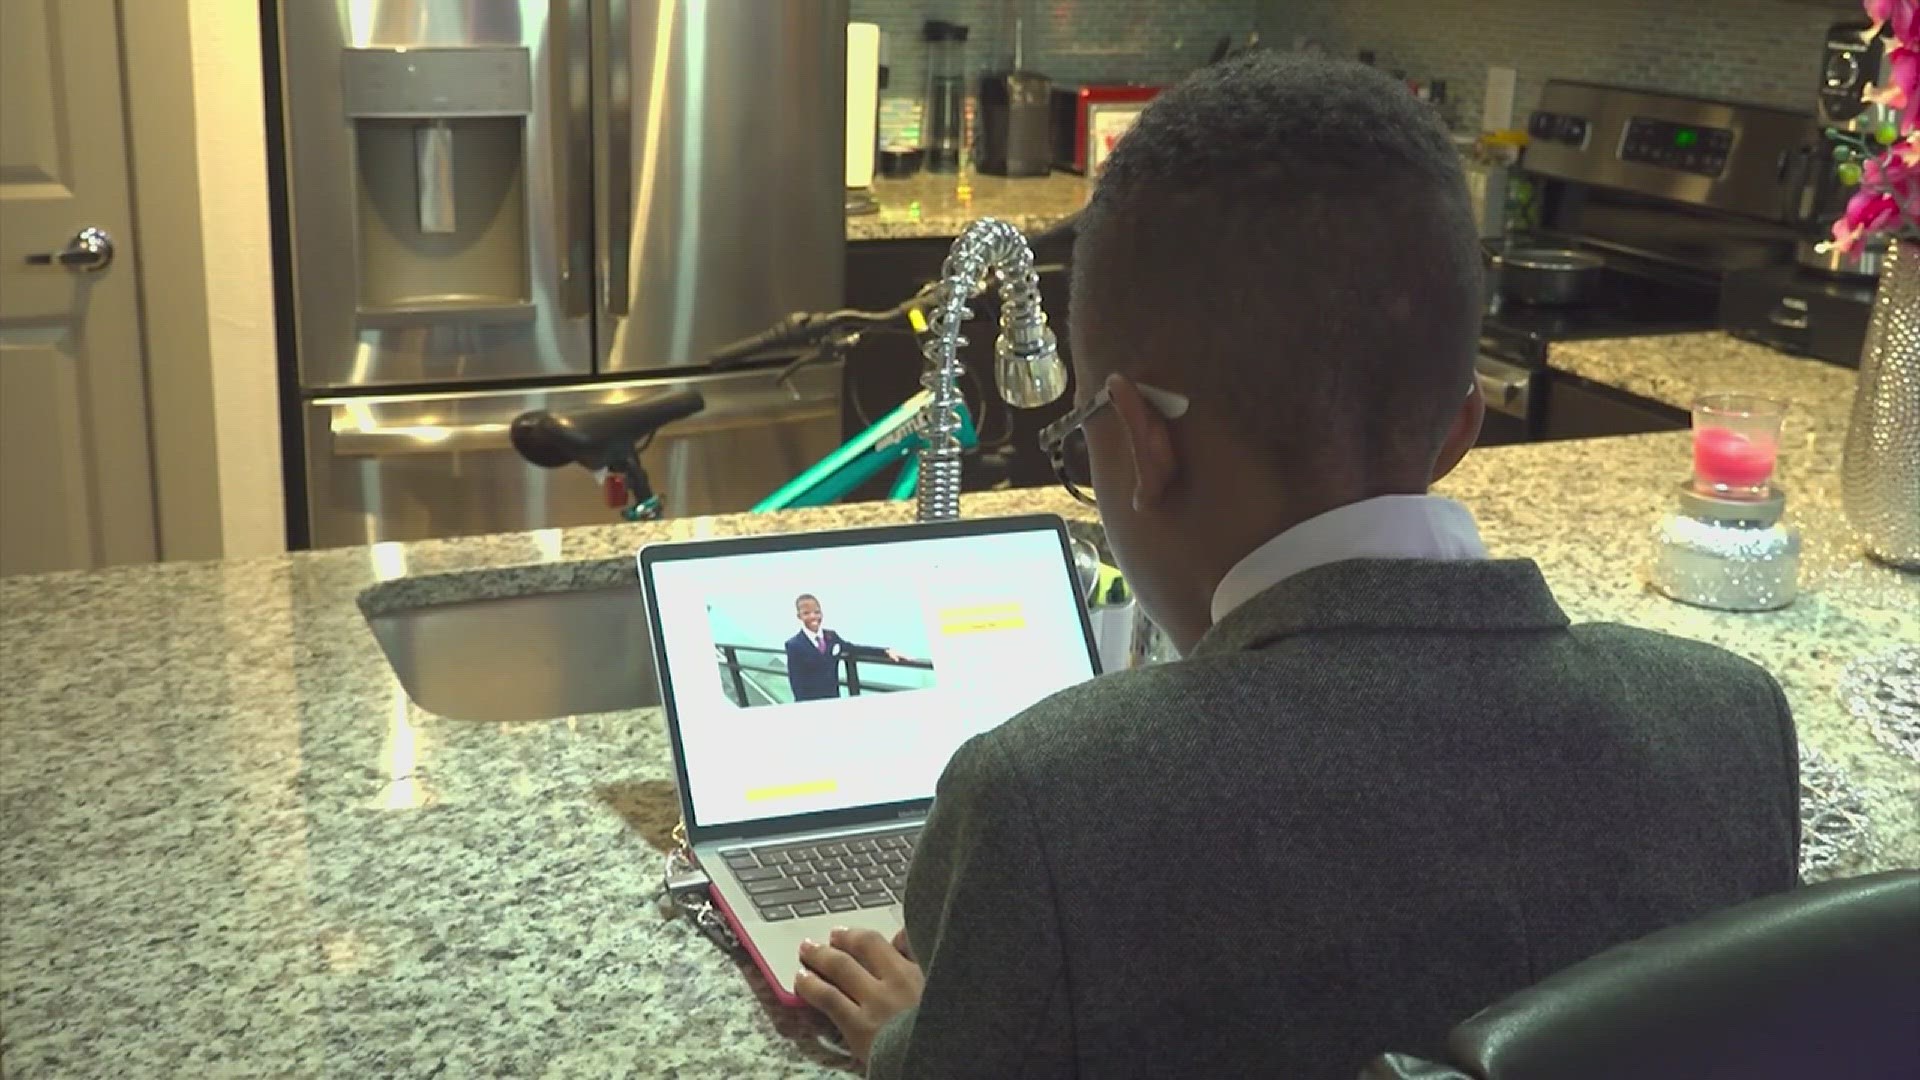 11-year-old Treyson Pierce started a fundraiser in May, but kept it hidden from his mom